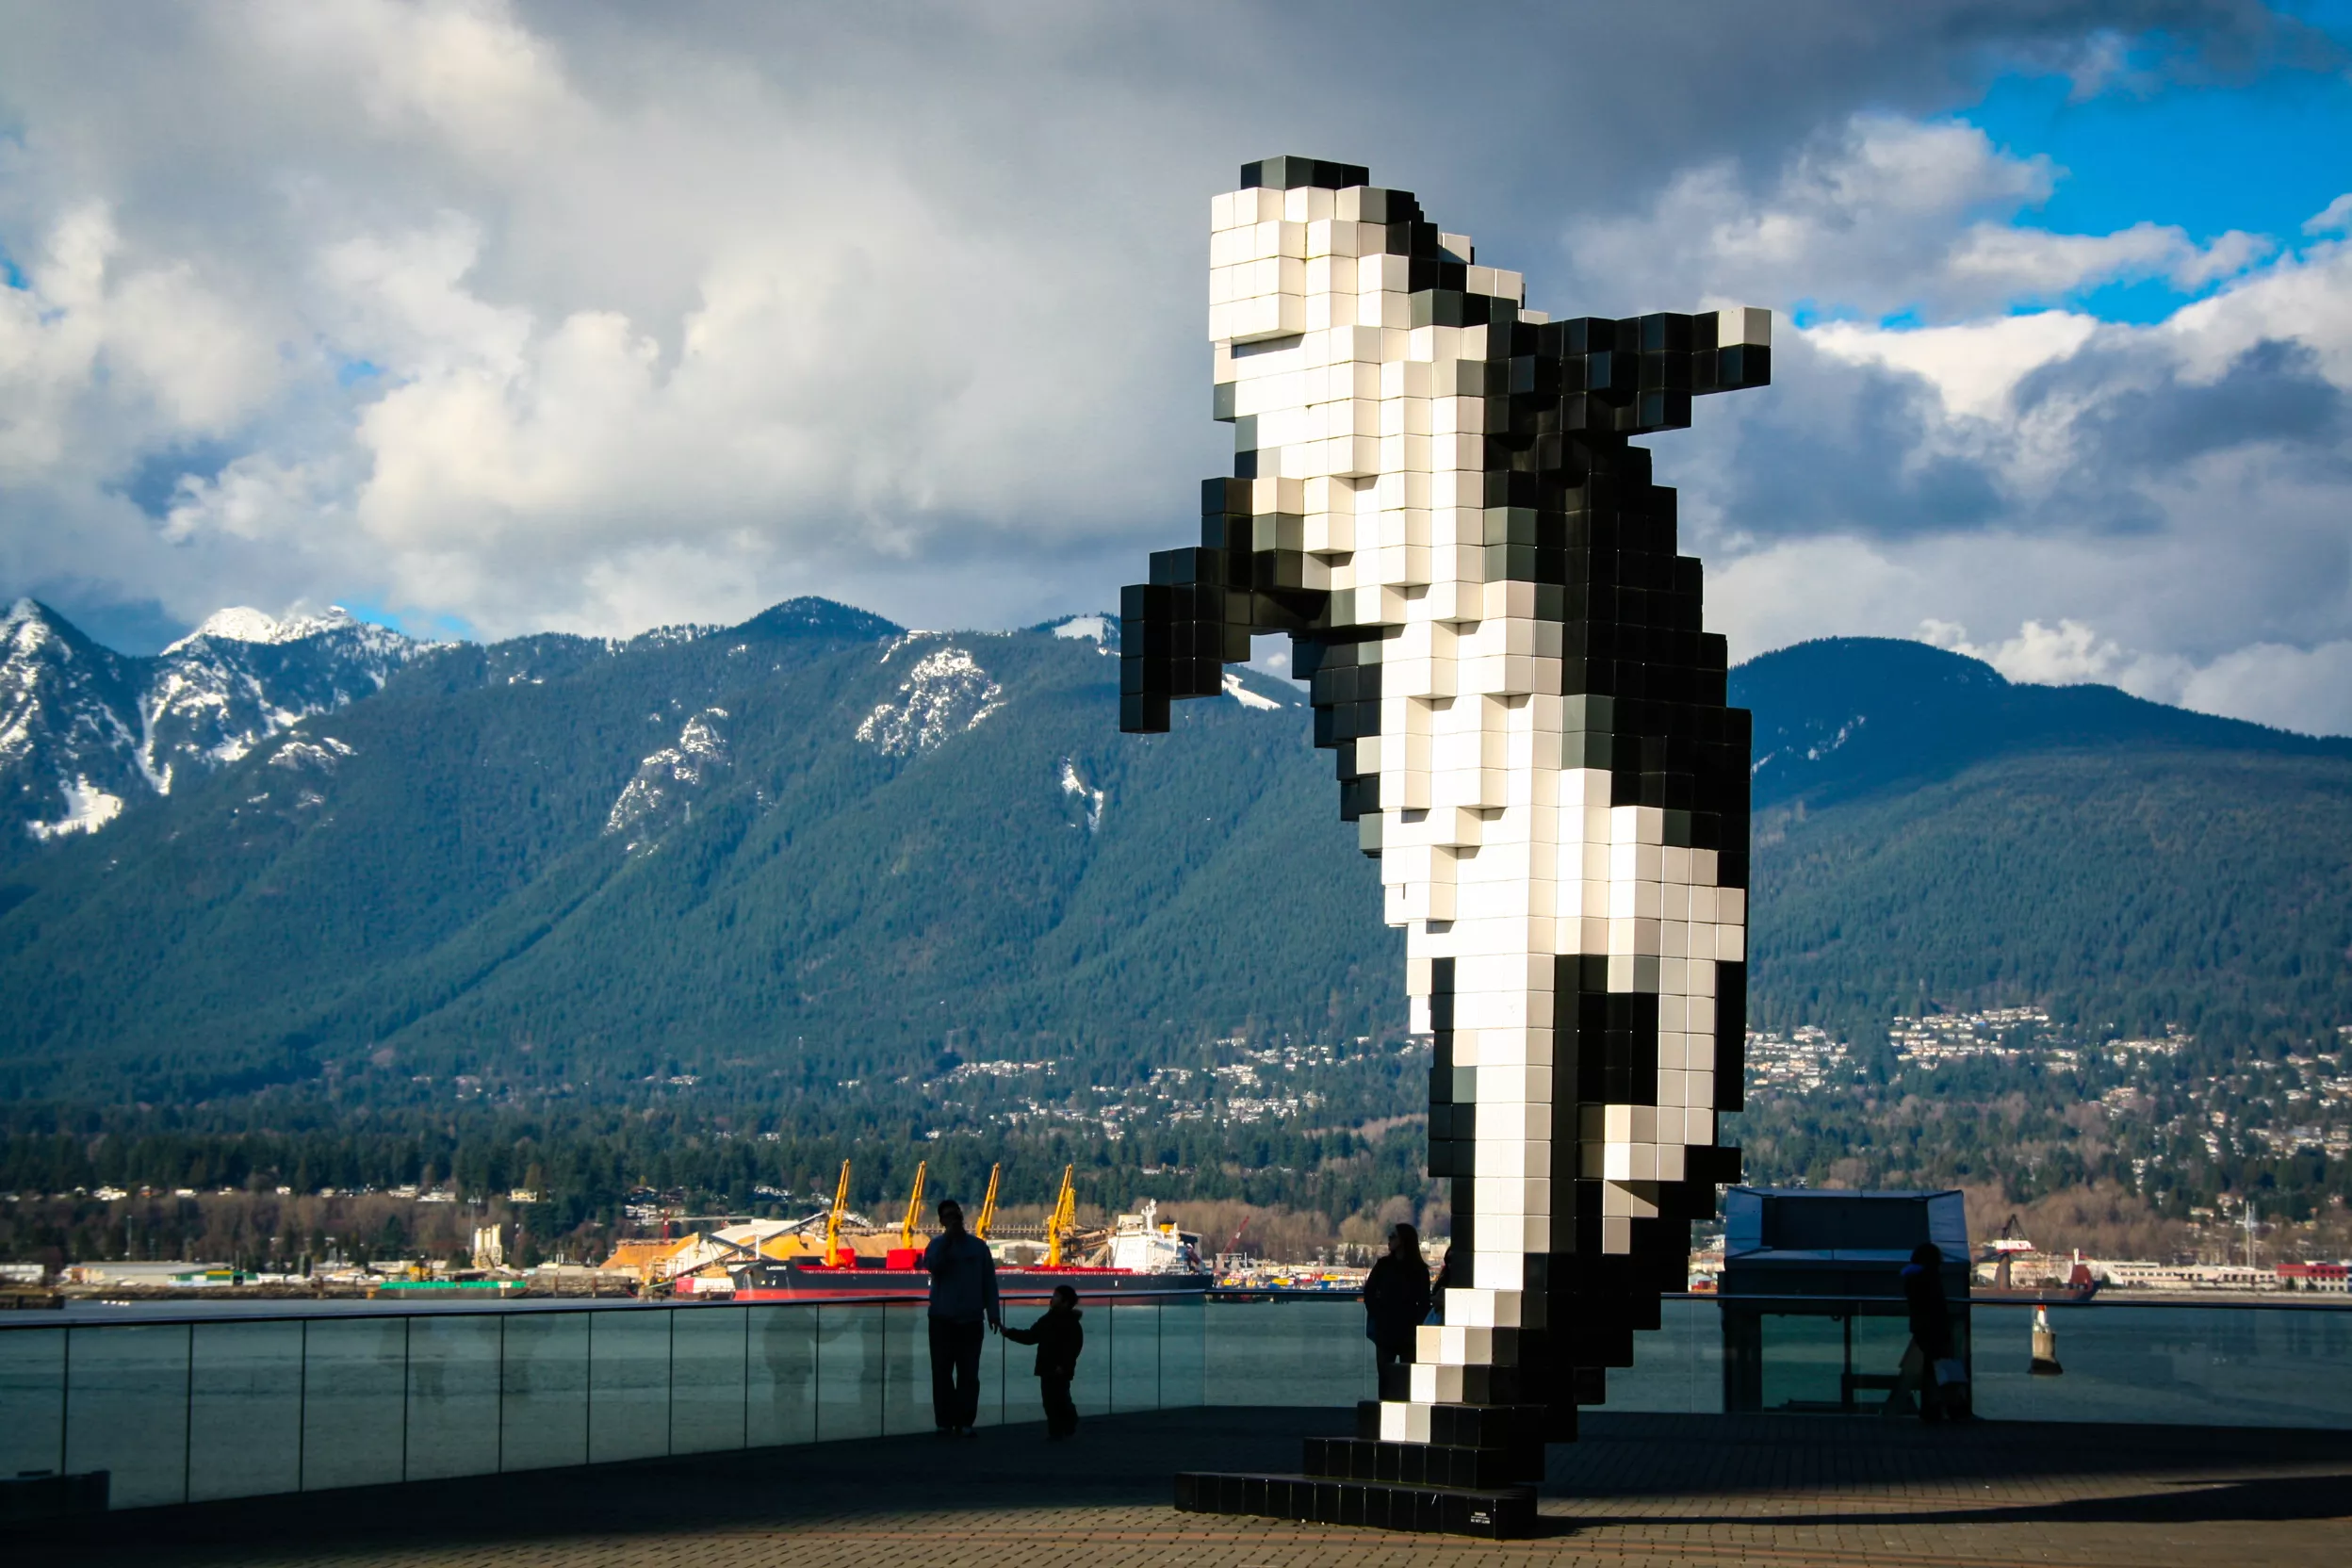 Digital Orca in Canada, North America | Monuments - Rated 3.6